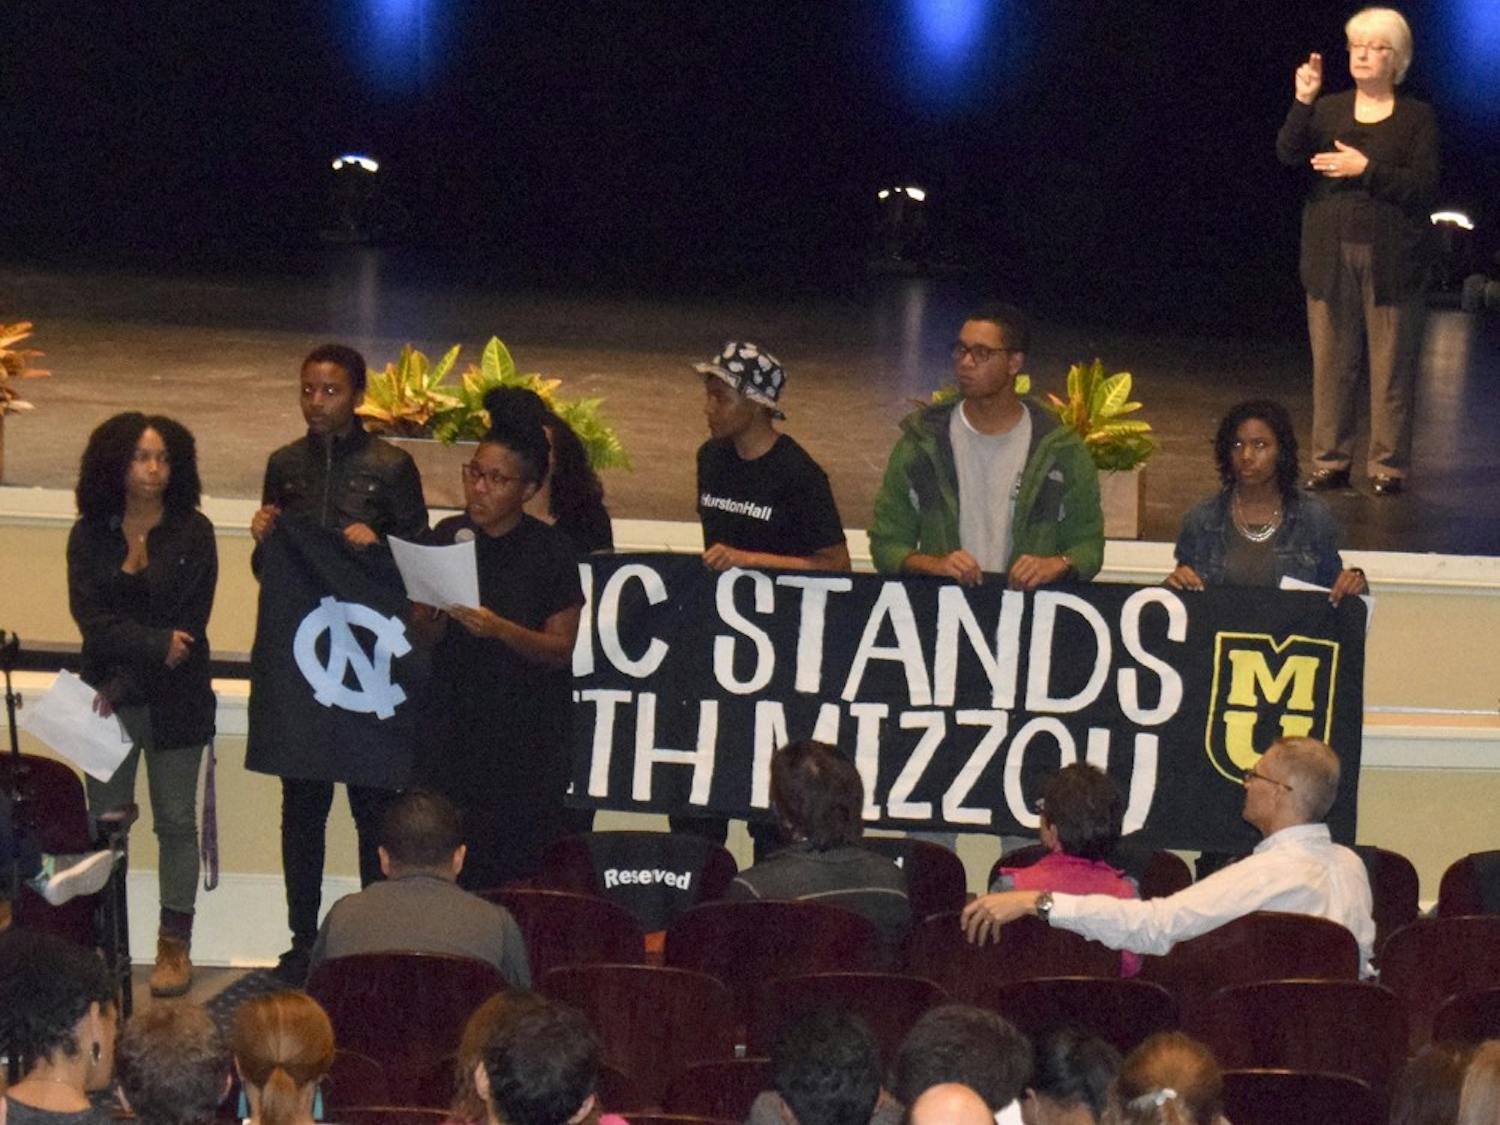 On November 19th UNC held a town hall meeting on race and inclusion at the university. 